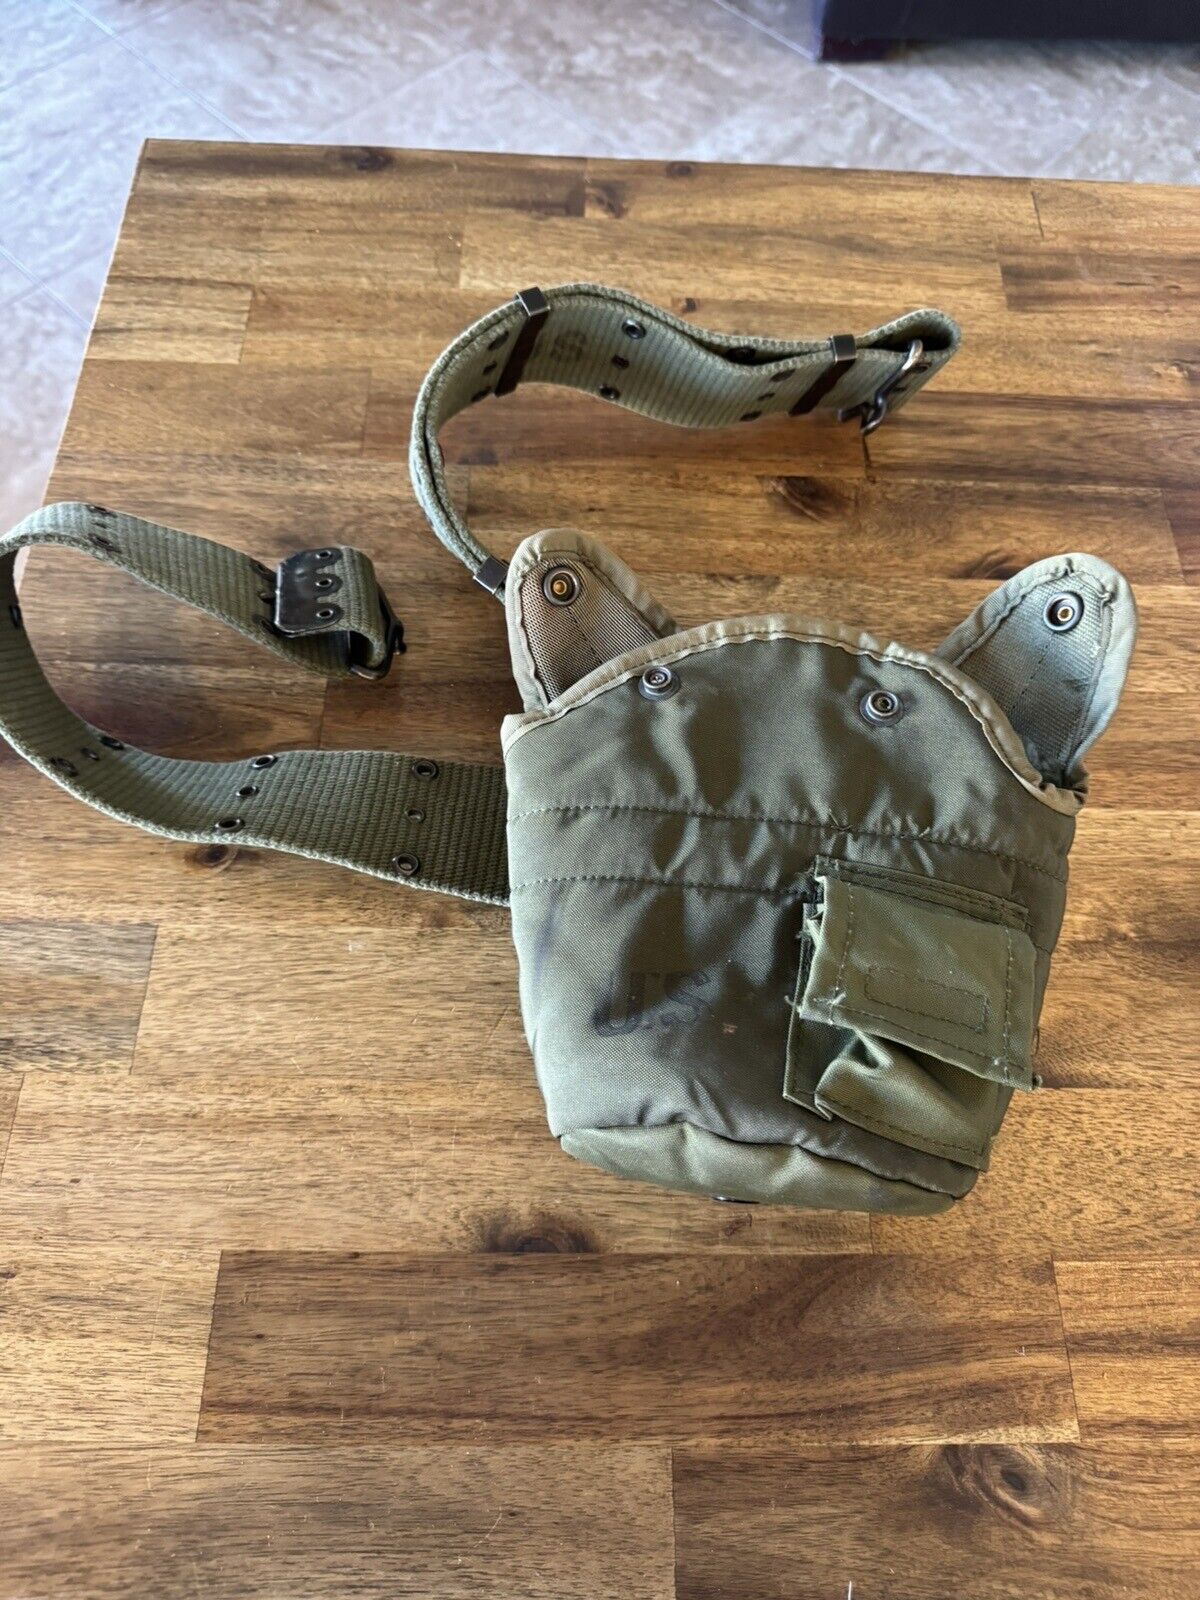 US ARMY WATER CANTEEN COVER LC-2 Pouch S&S Garment MFG. And Web Belt Old Clips